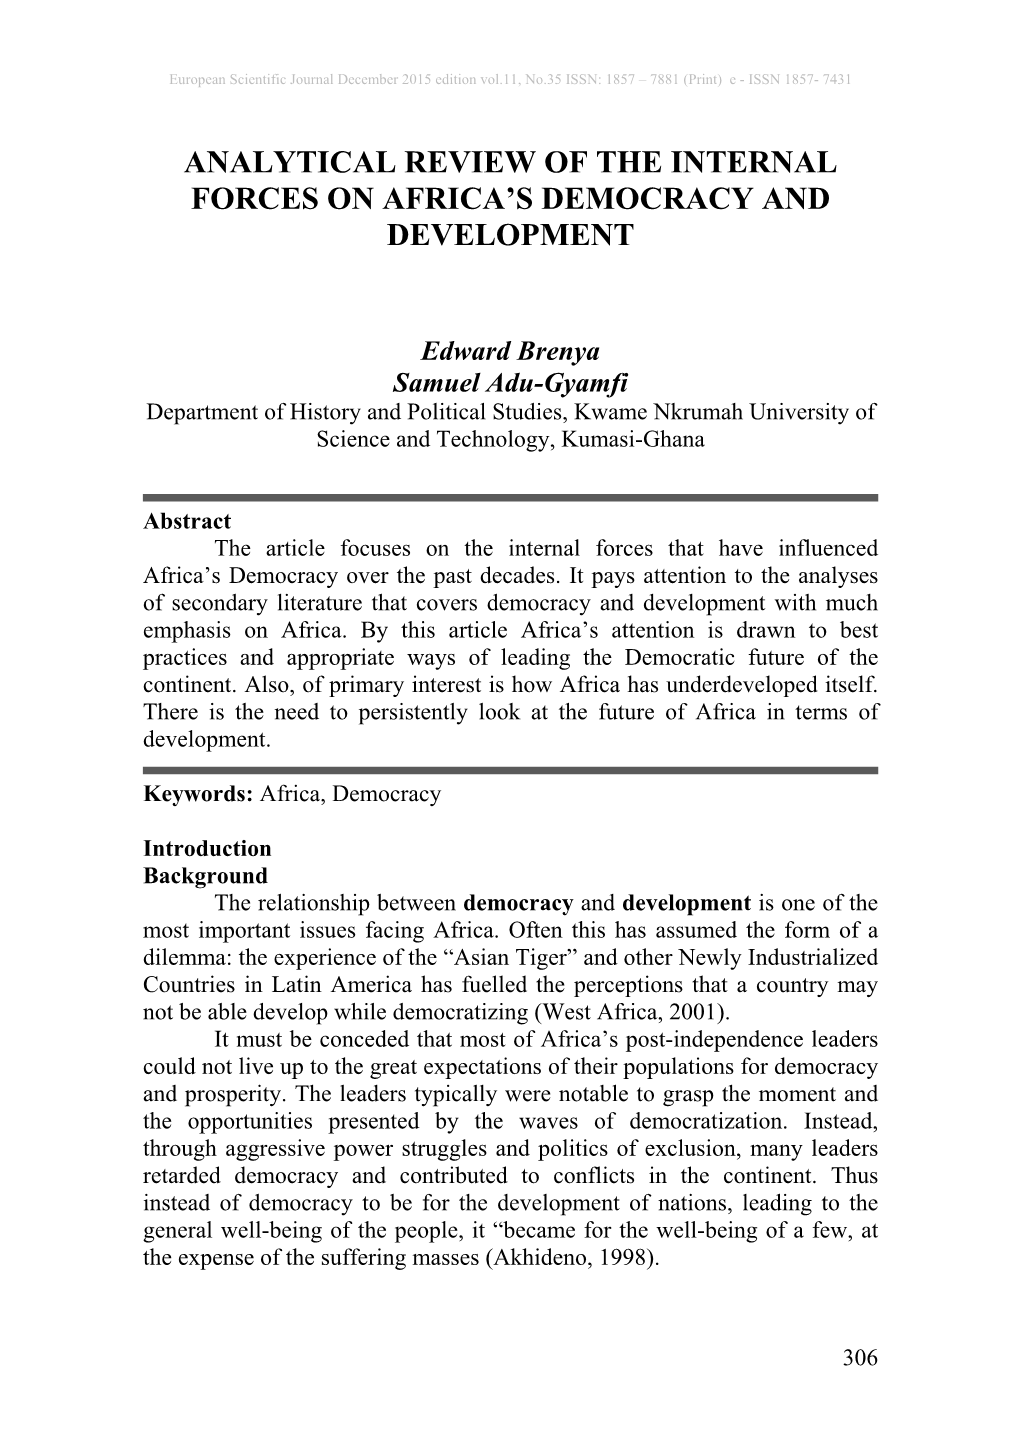 Analytical Review of the Internal Forces on Africa's Democracy and Development